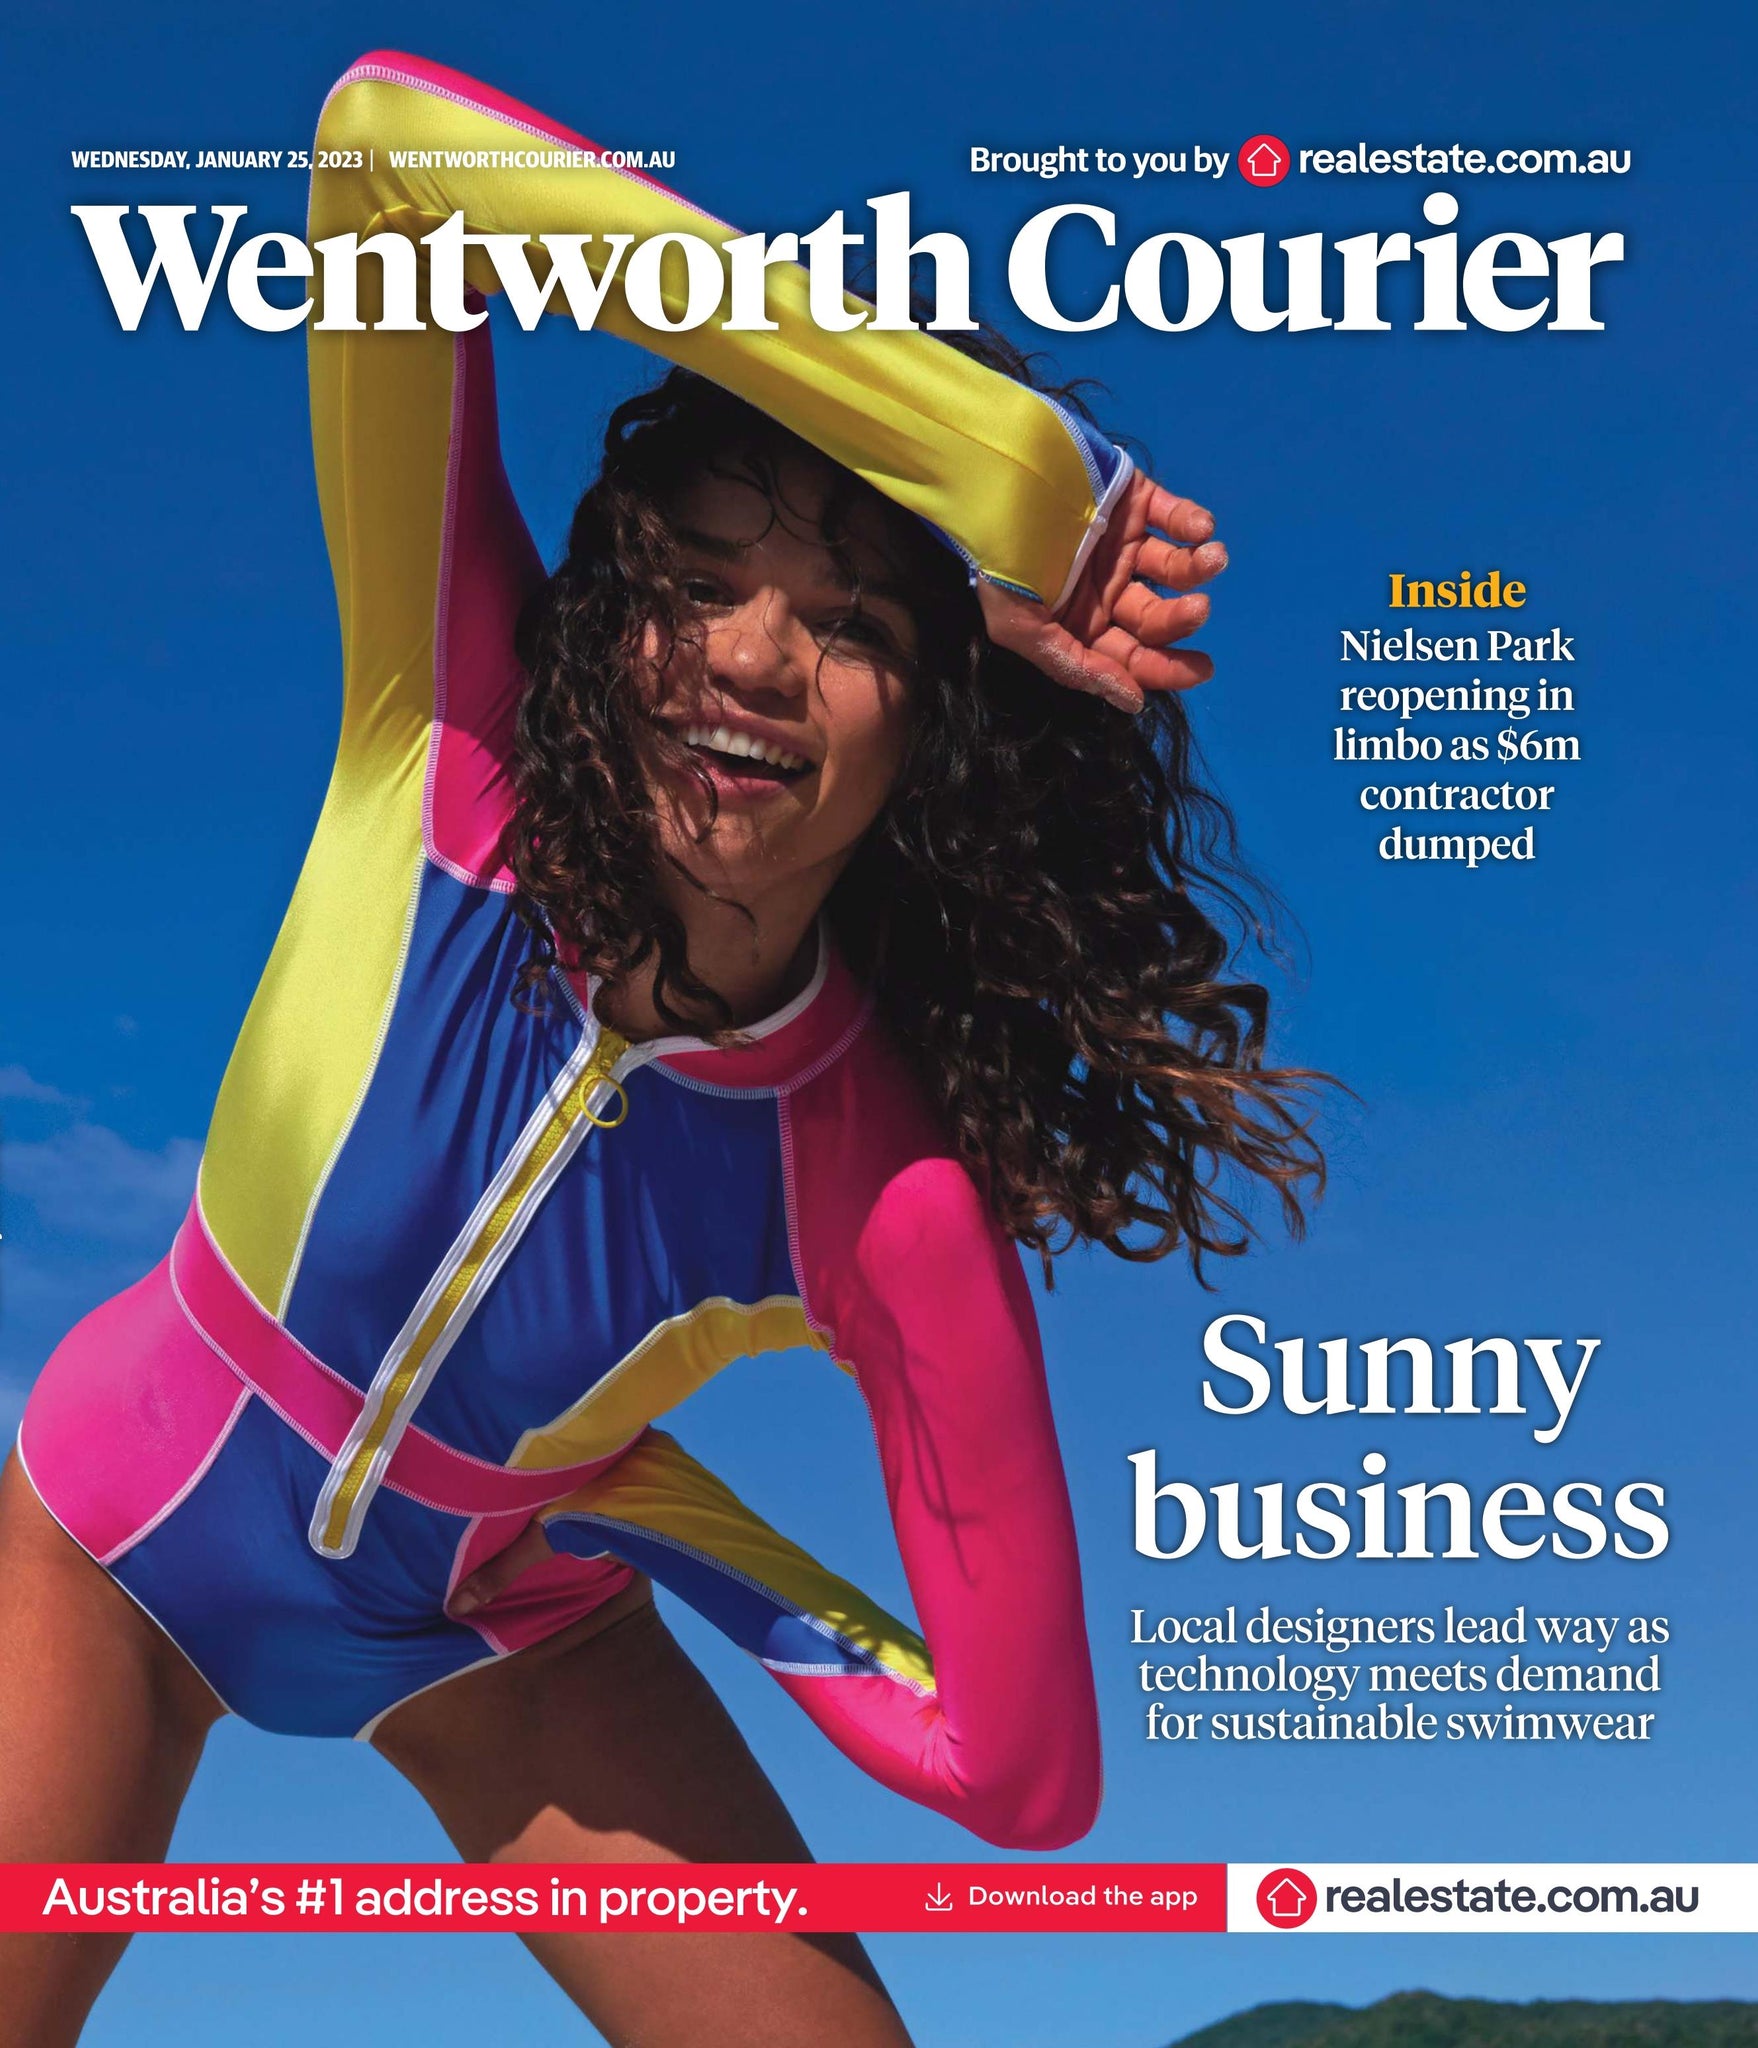 Wentworth Courier Rushcutters Bay